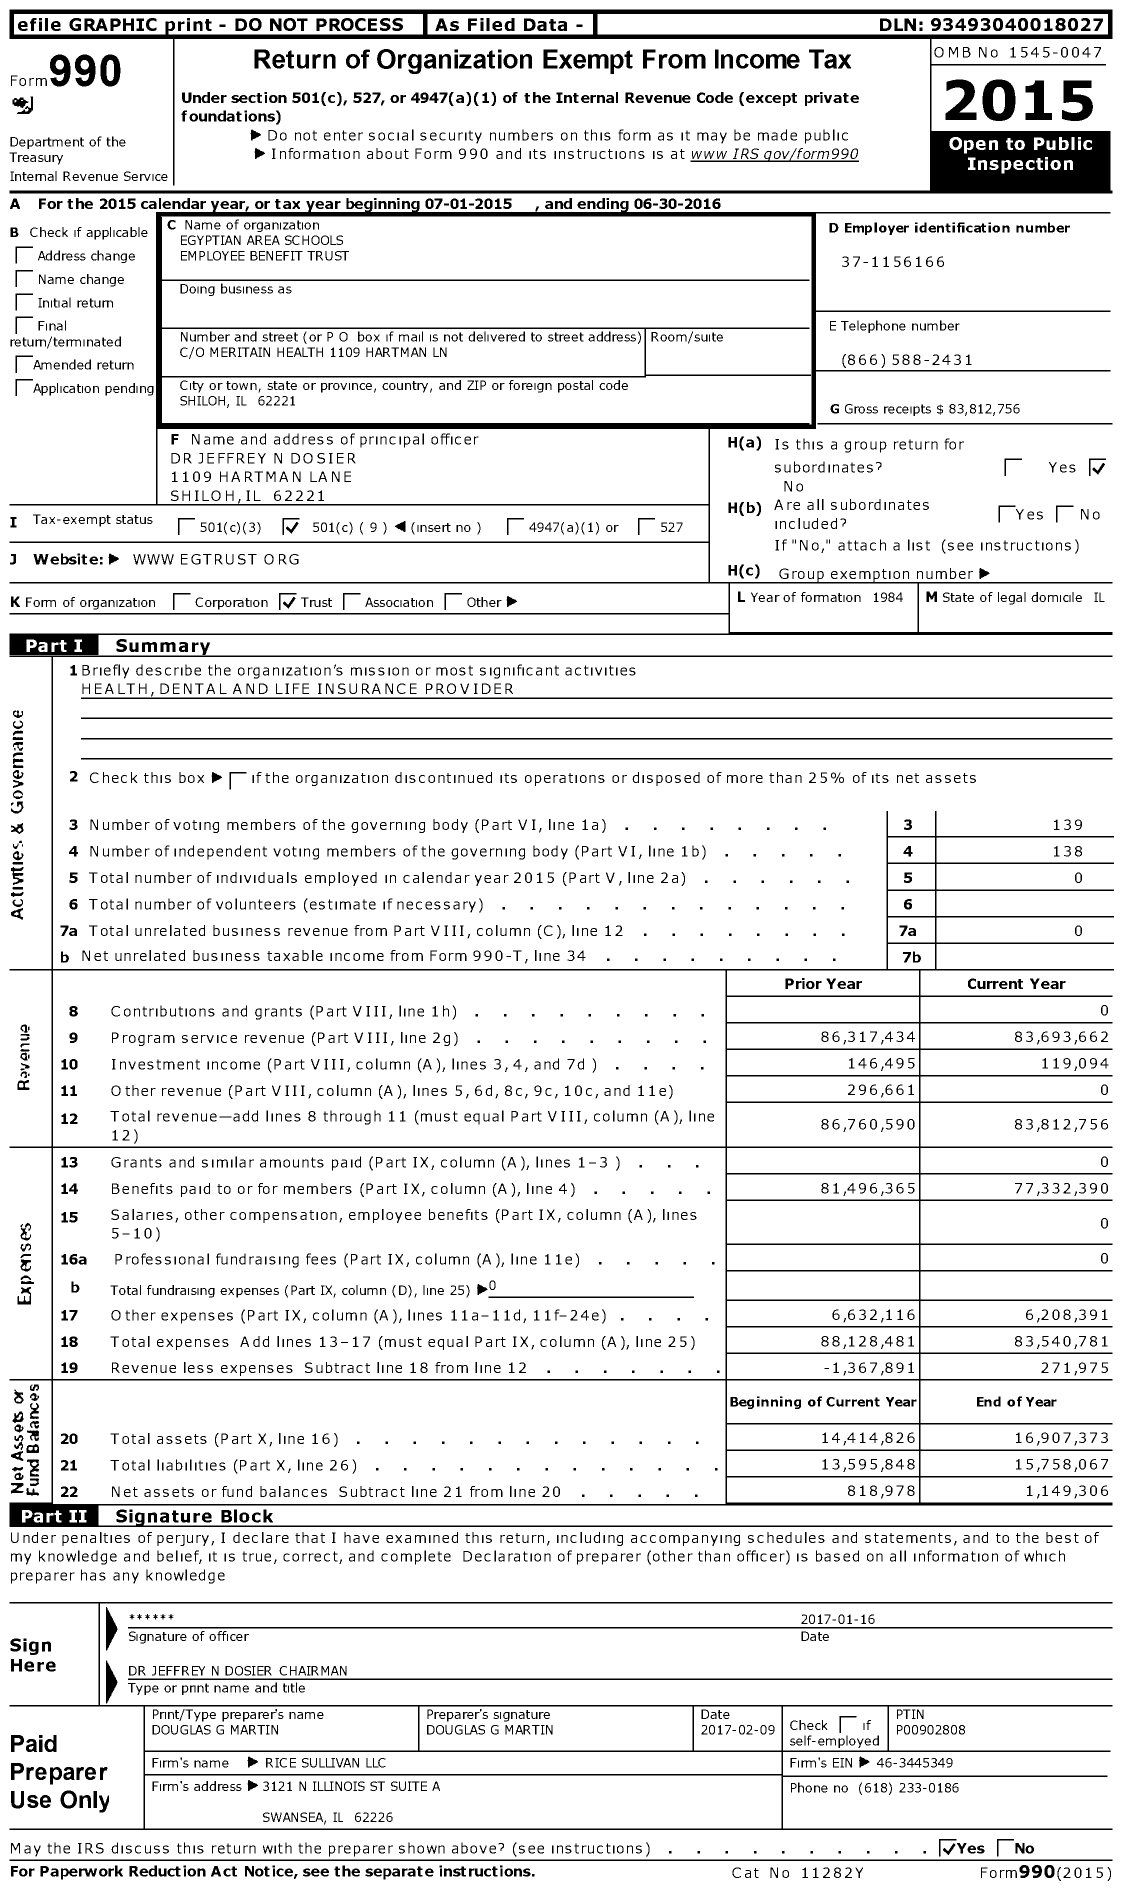 Image of first page of 2015 Form 990O for Egyptian Area Schools Employee Benefit Trust